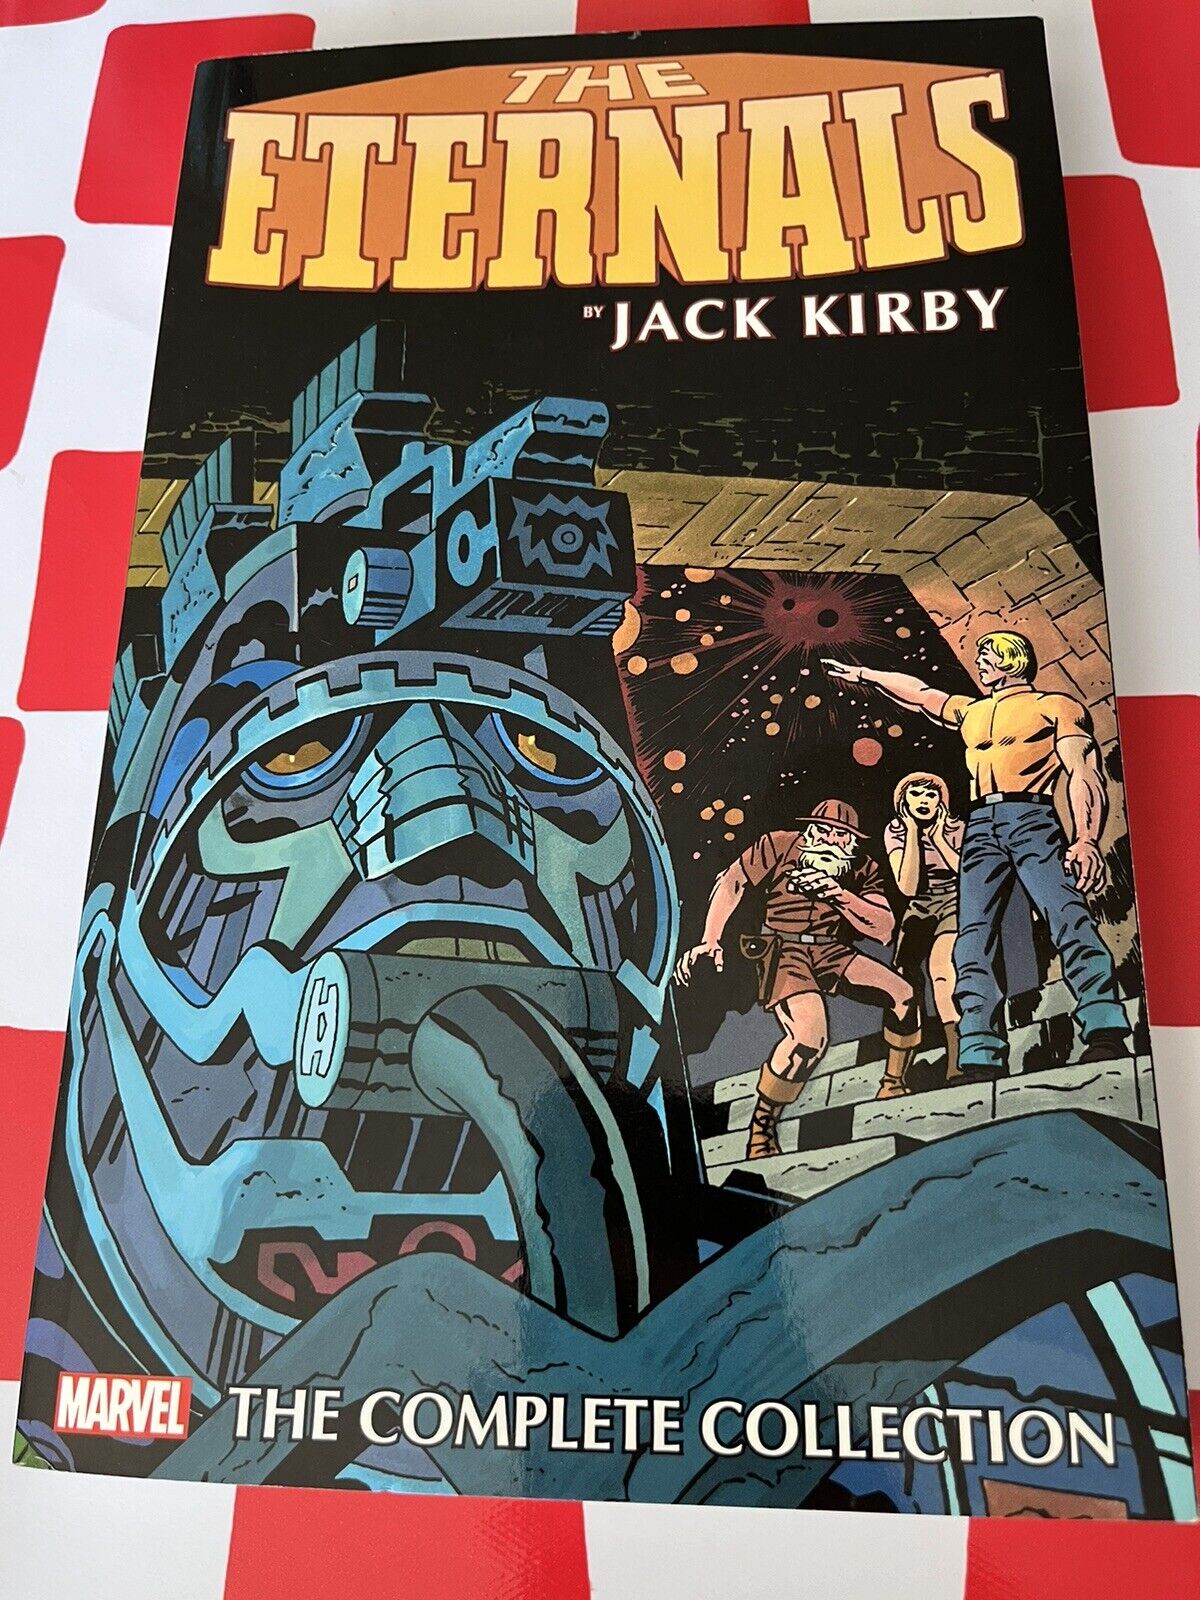 Eternals by Jack Kirby: the Complete Collection (Marvel Comics 2020)